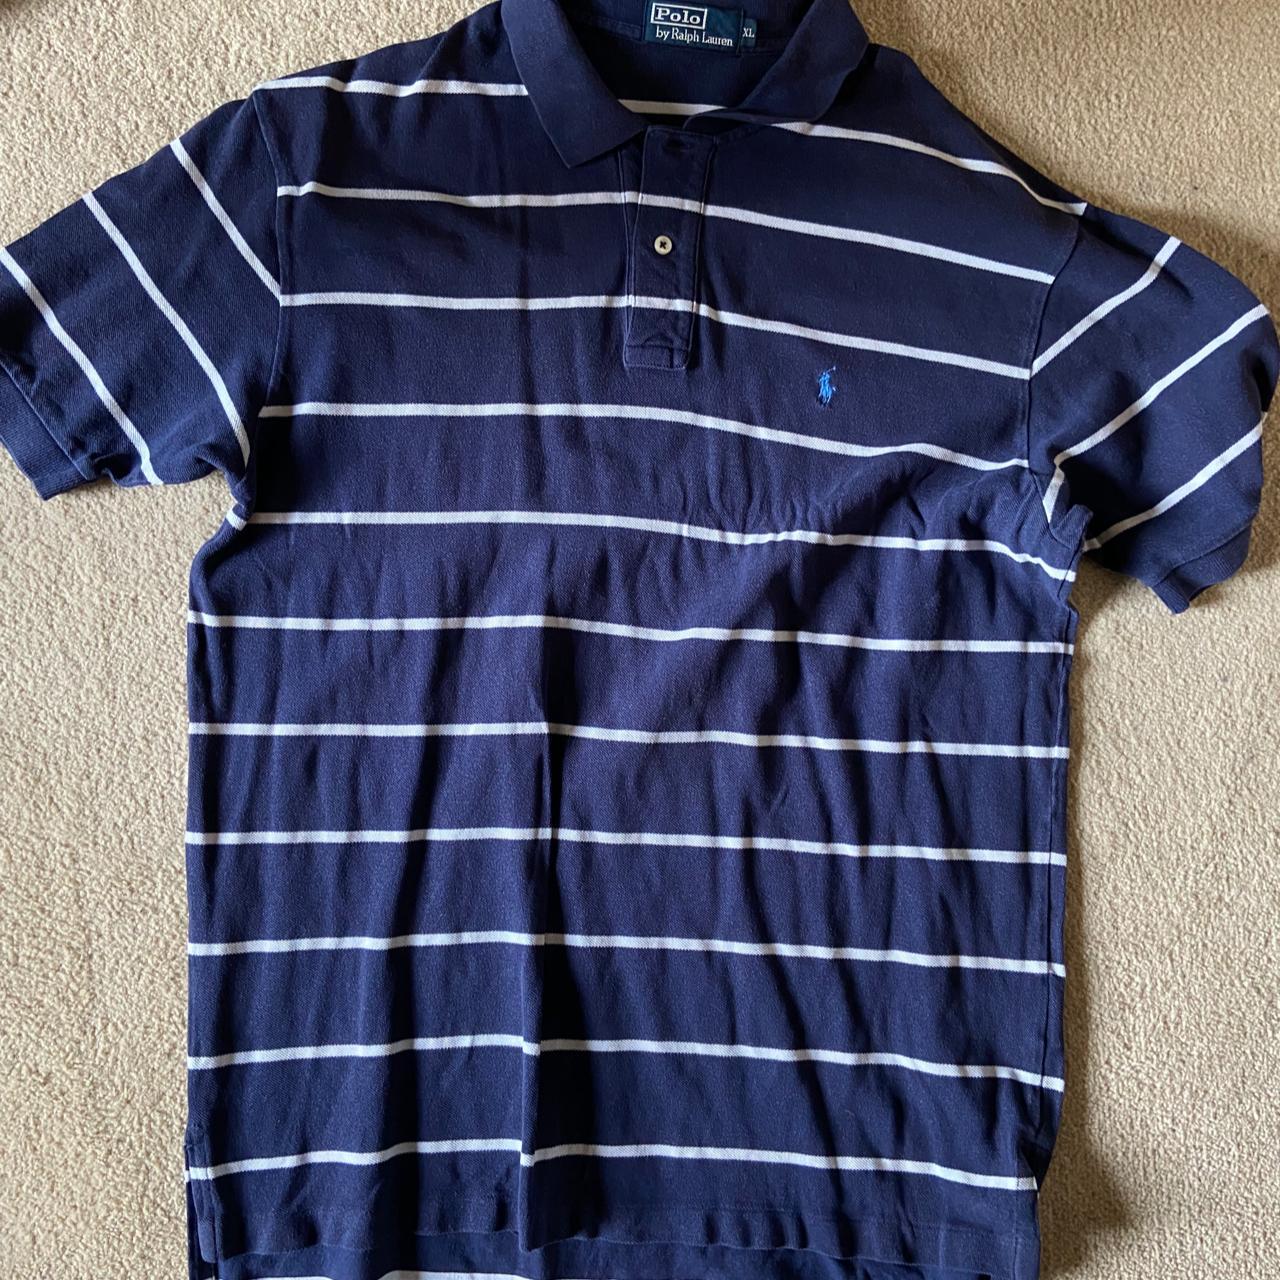 Pre-loved vintage Ralph Lauren polo shirt. This polo... - Depop